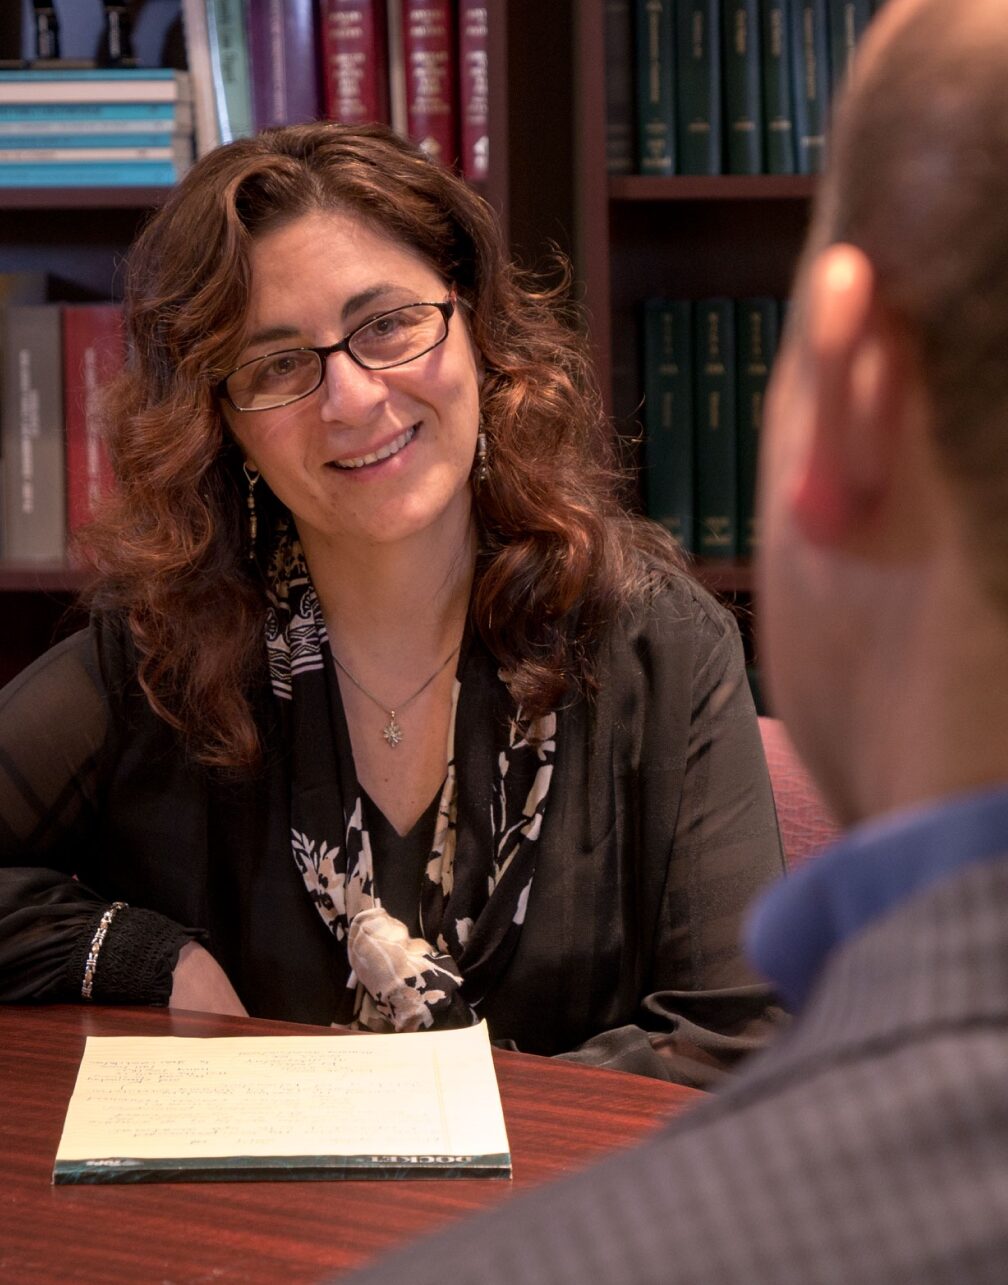 Photograph of Sarina Gianna, Esq., New Jersey divorce lawyer in her office with a client.